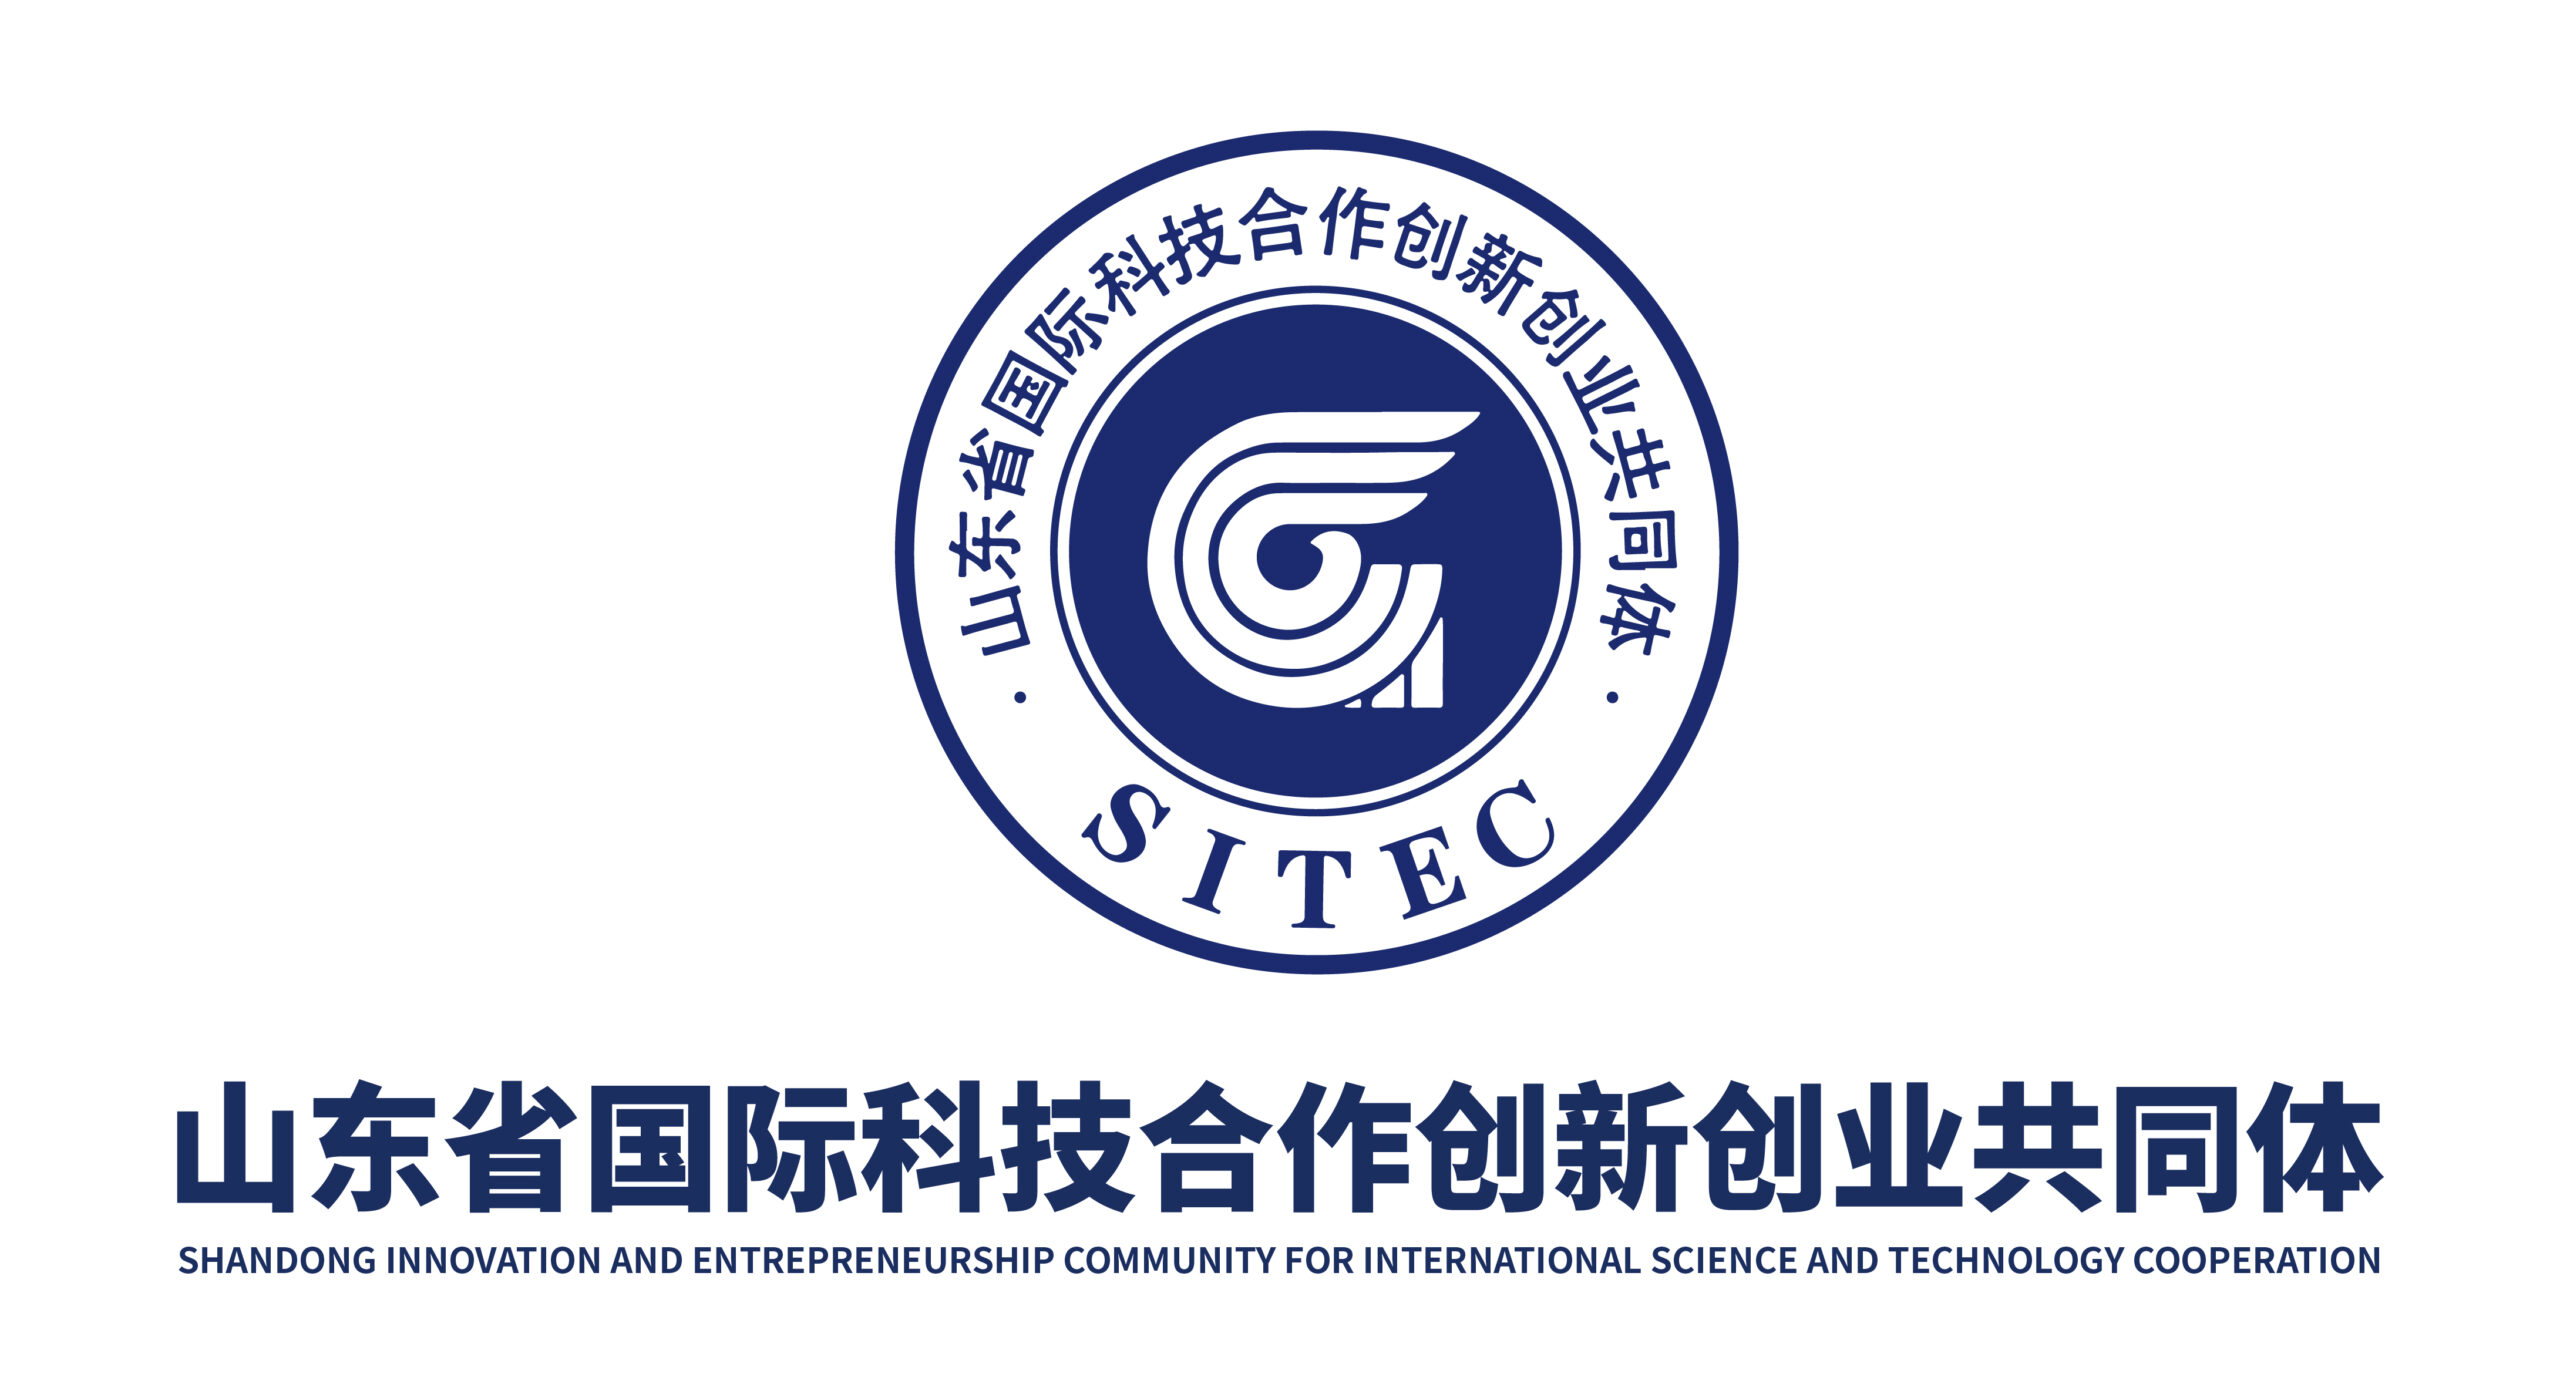 Shandong International Science and Technology Cooperation Innovation and Entrepreneurship Community (SITEC)